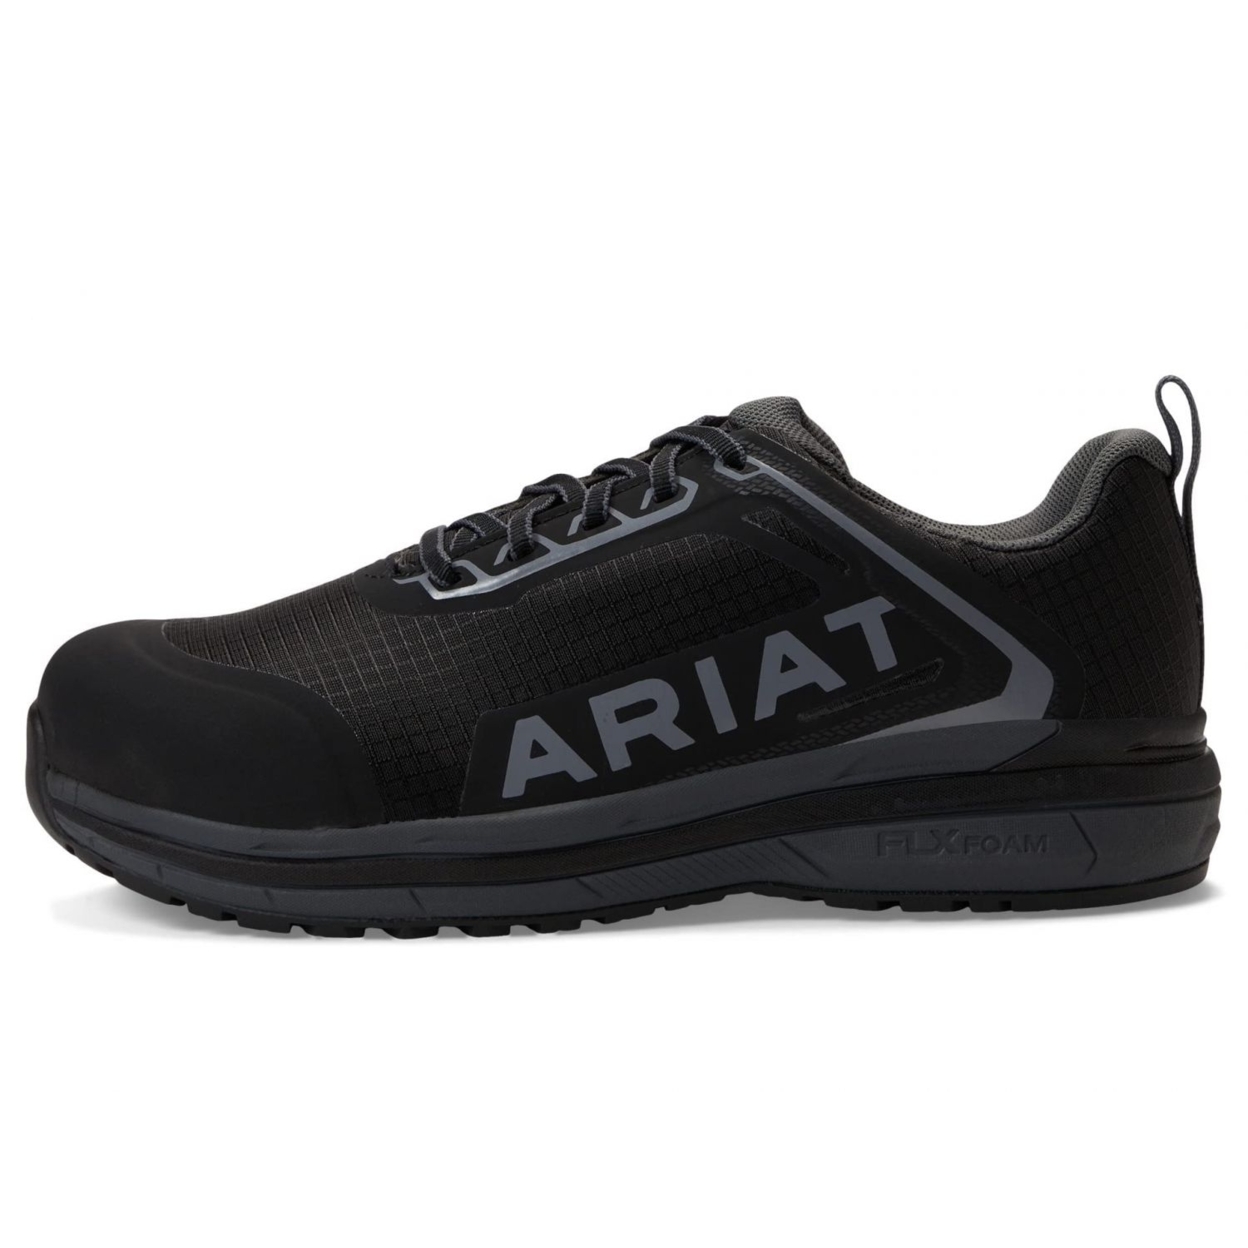 ARIAT Women's Outpace Composite Toe Safety Shoe Fire ONE SIZE BLACK - BLACK, 10